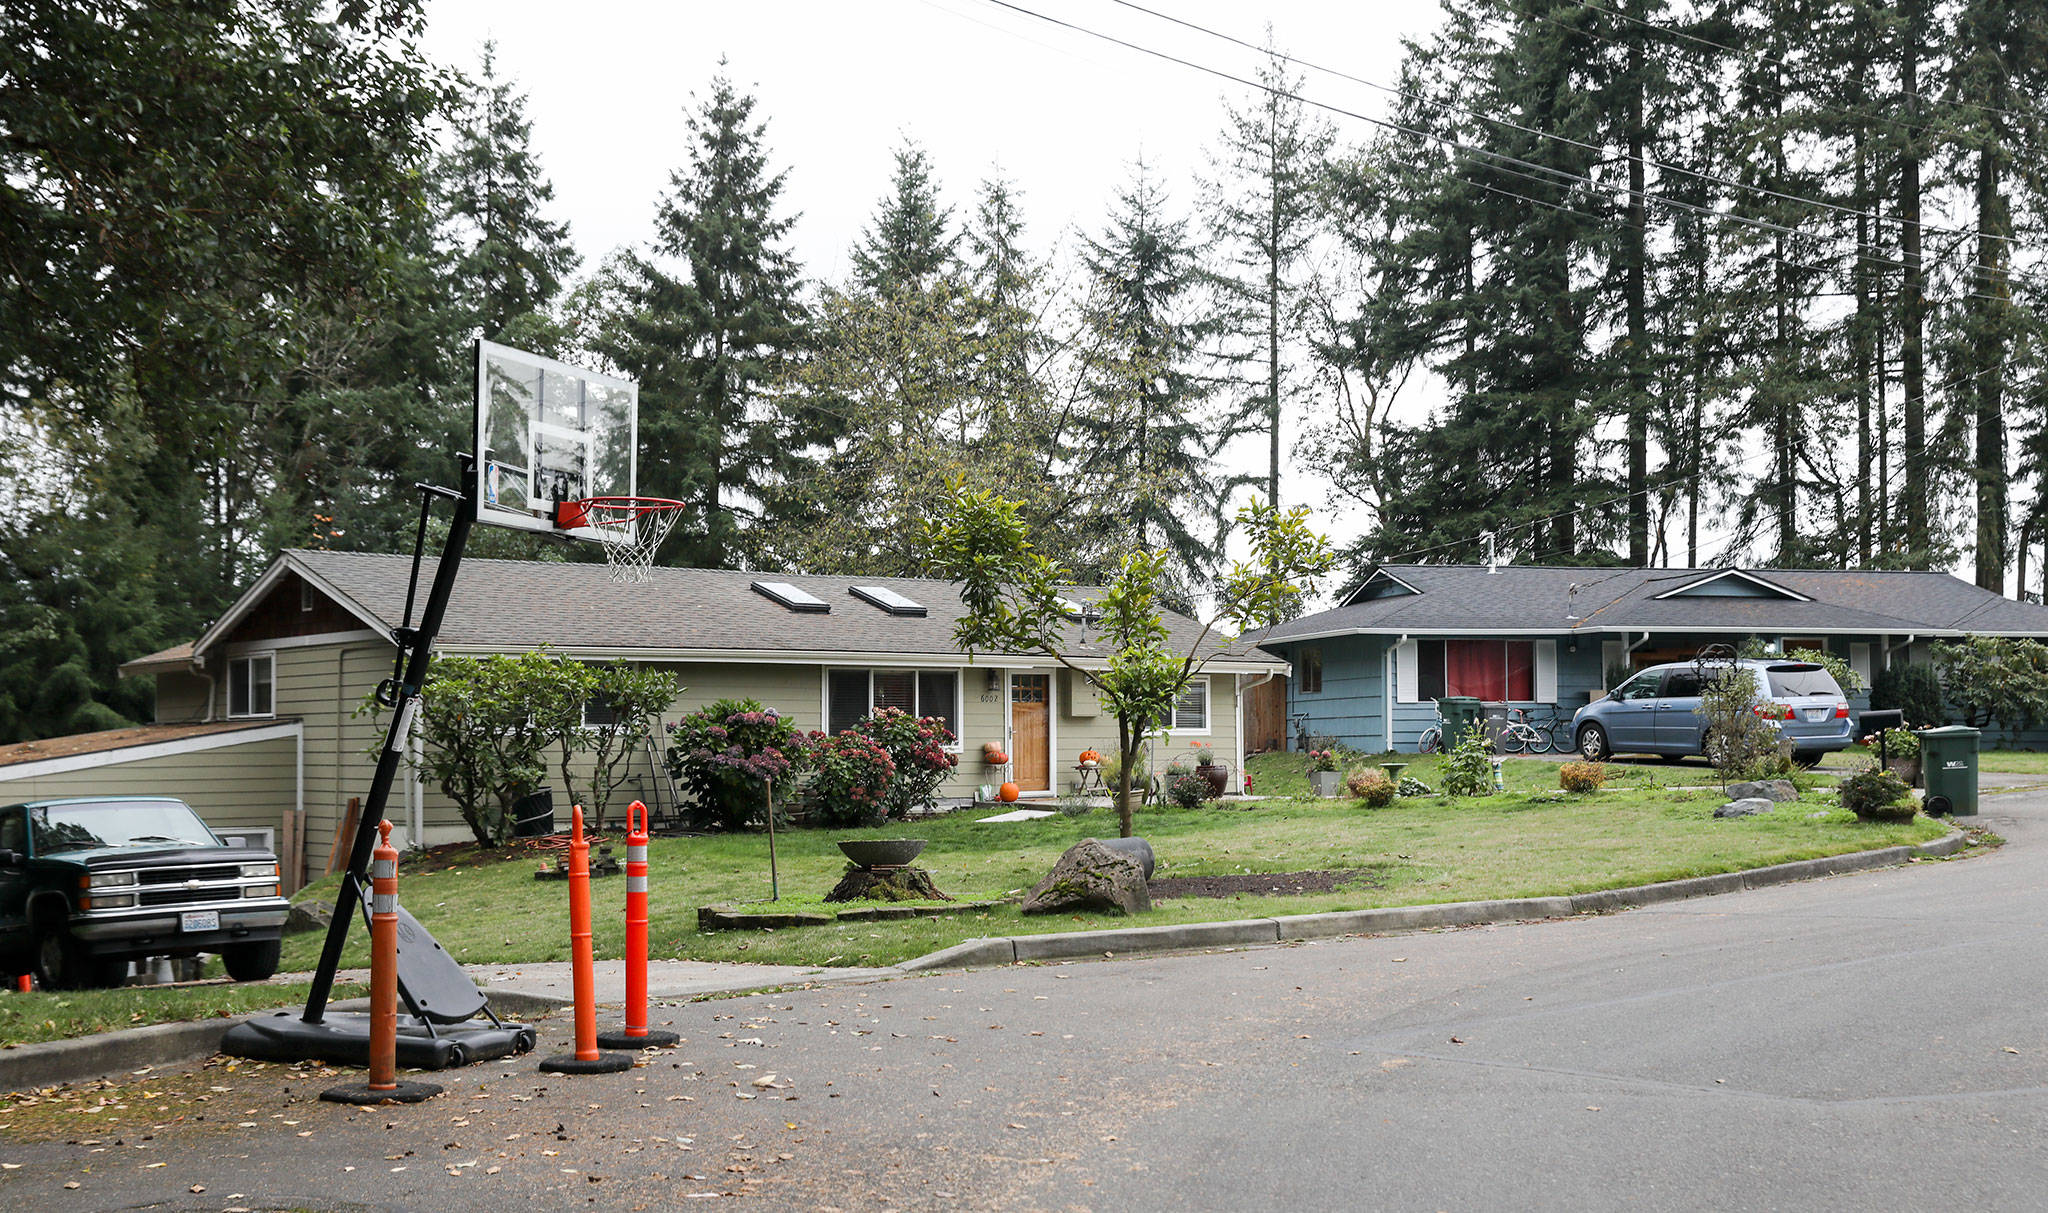 In 20 years, the neighborhoods near the Mountlake Terrace Transit Center could look radically different. (Lizz Giordano / The Herald)